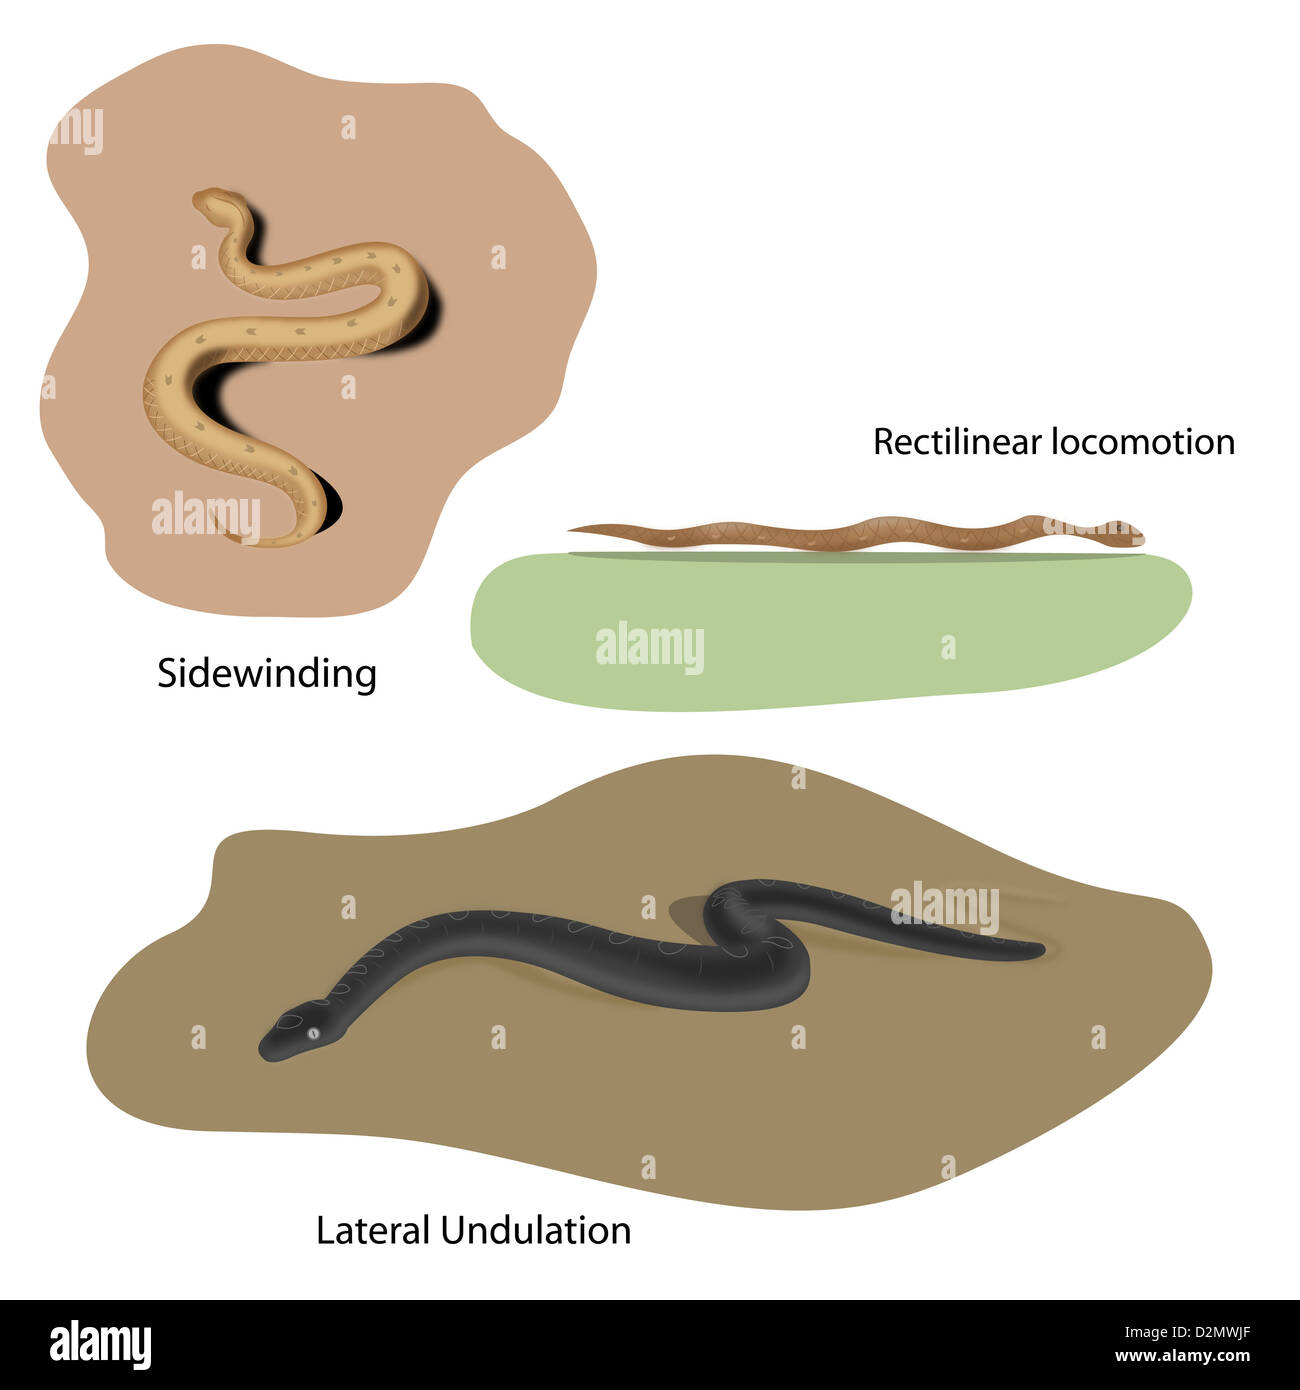 Lateral Undulation, Rectilinear and Sidewinding locomotion of snakes Stock Photo